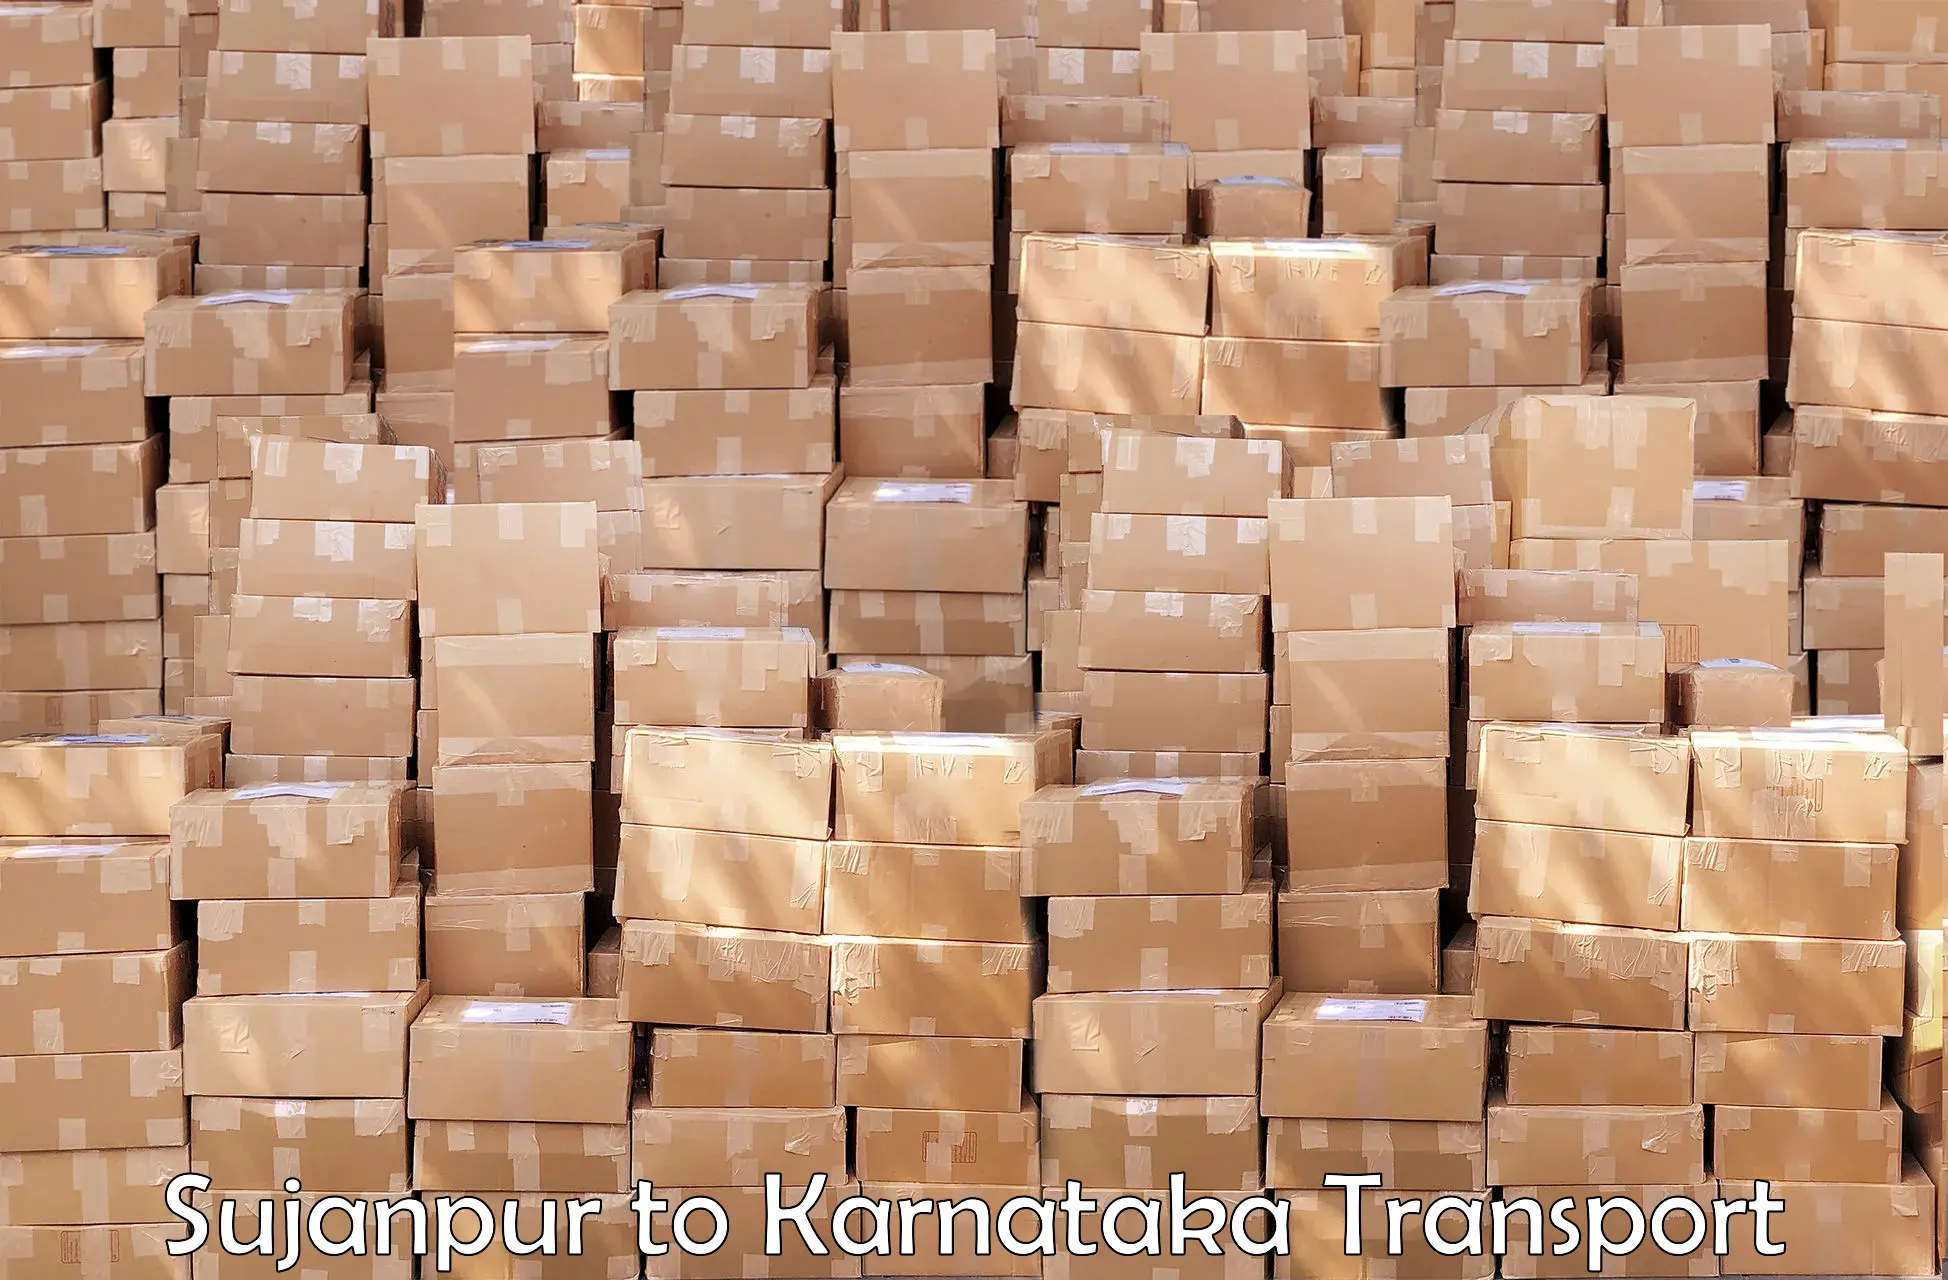 Express transport services in Sujanpur to Bangalore